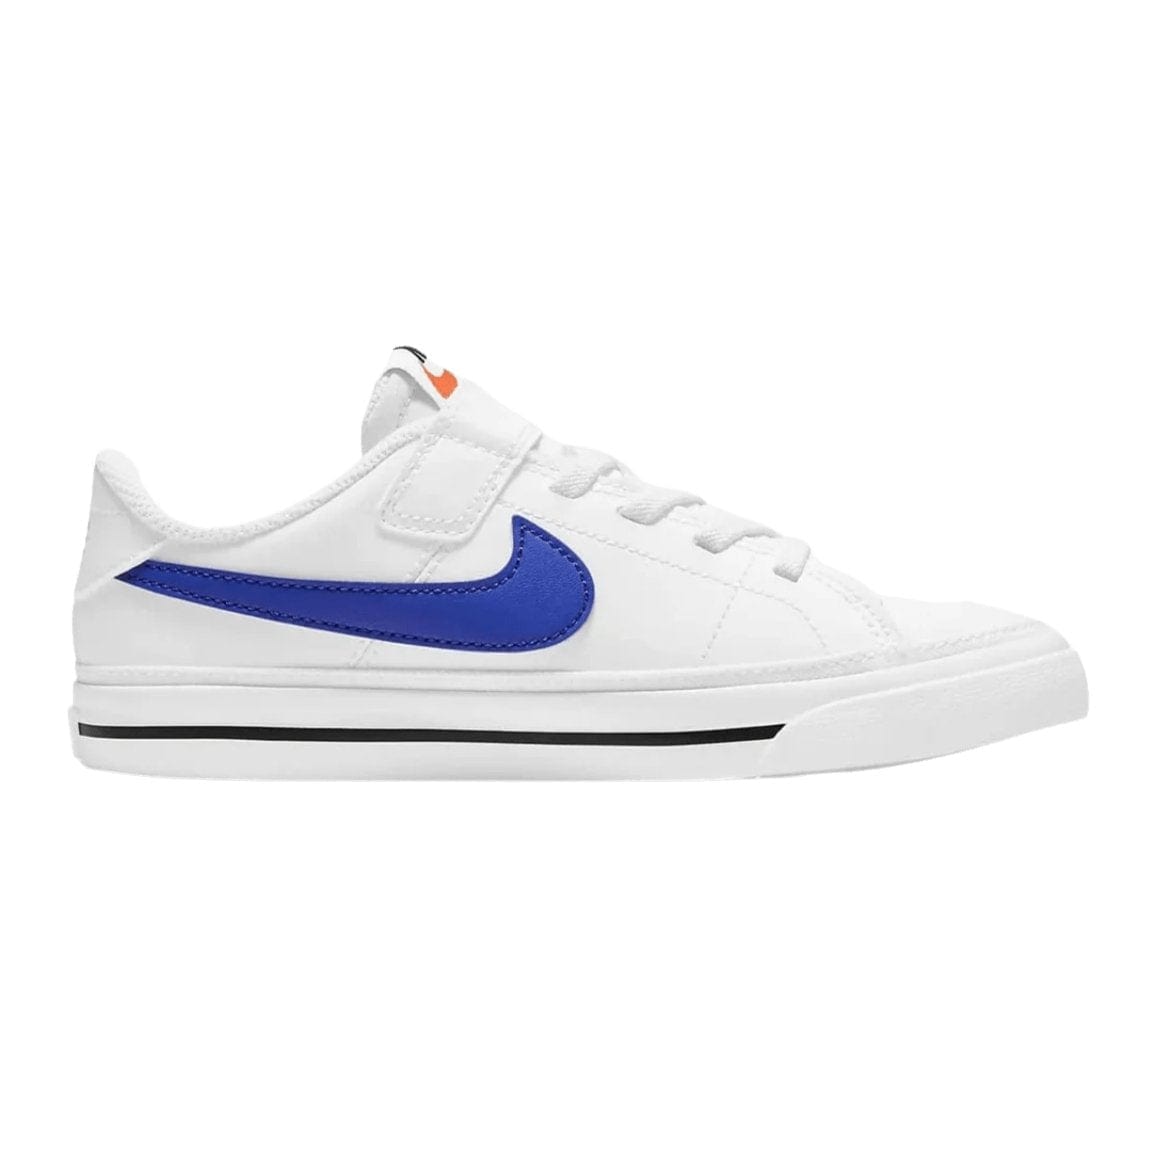 Nike NIKE TODDLER'S COURT LEGACY WHITE/BLUE SHOES - INSPORT